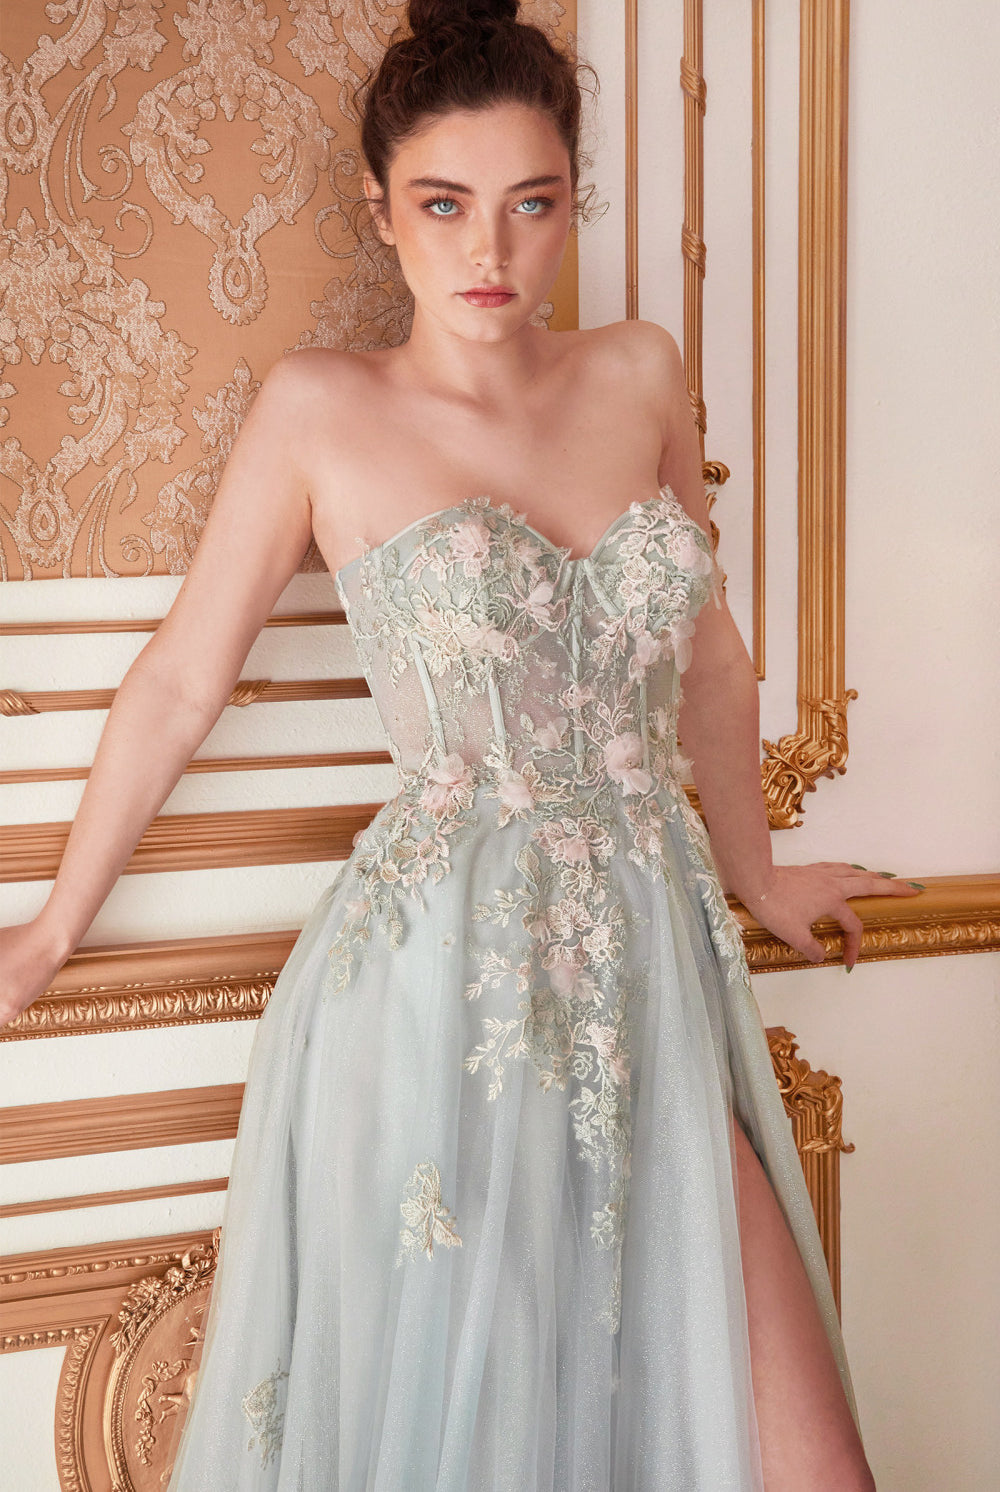 Prom & Bridesmaid Gown w/ Floral Overskirt, Sheer Strapless Bodice & A-Line Formal Dress-smcdress